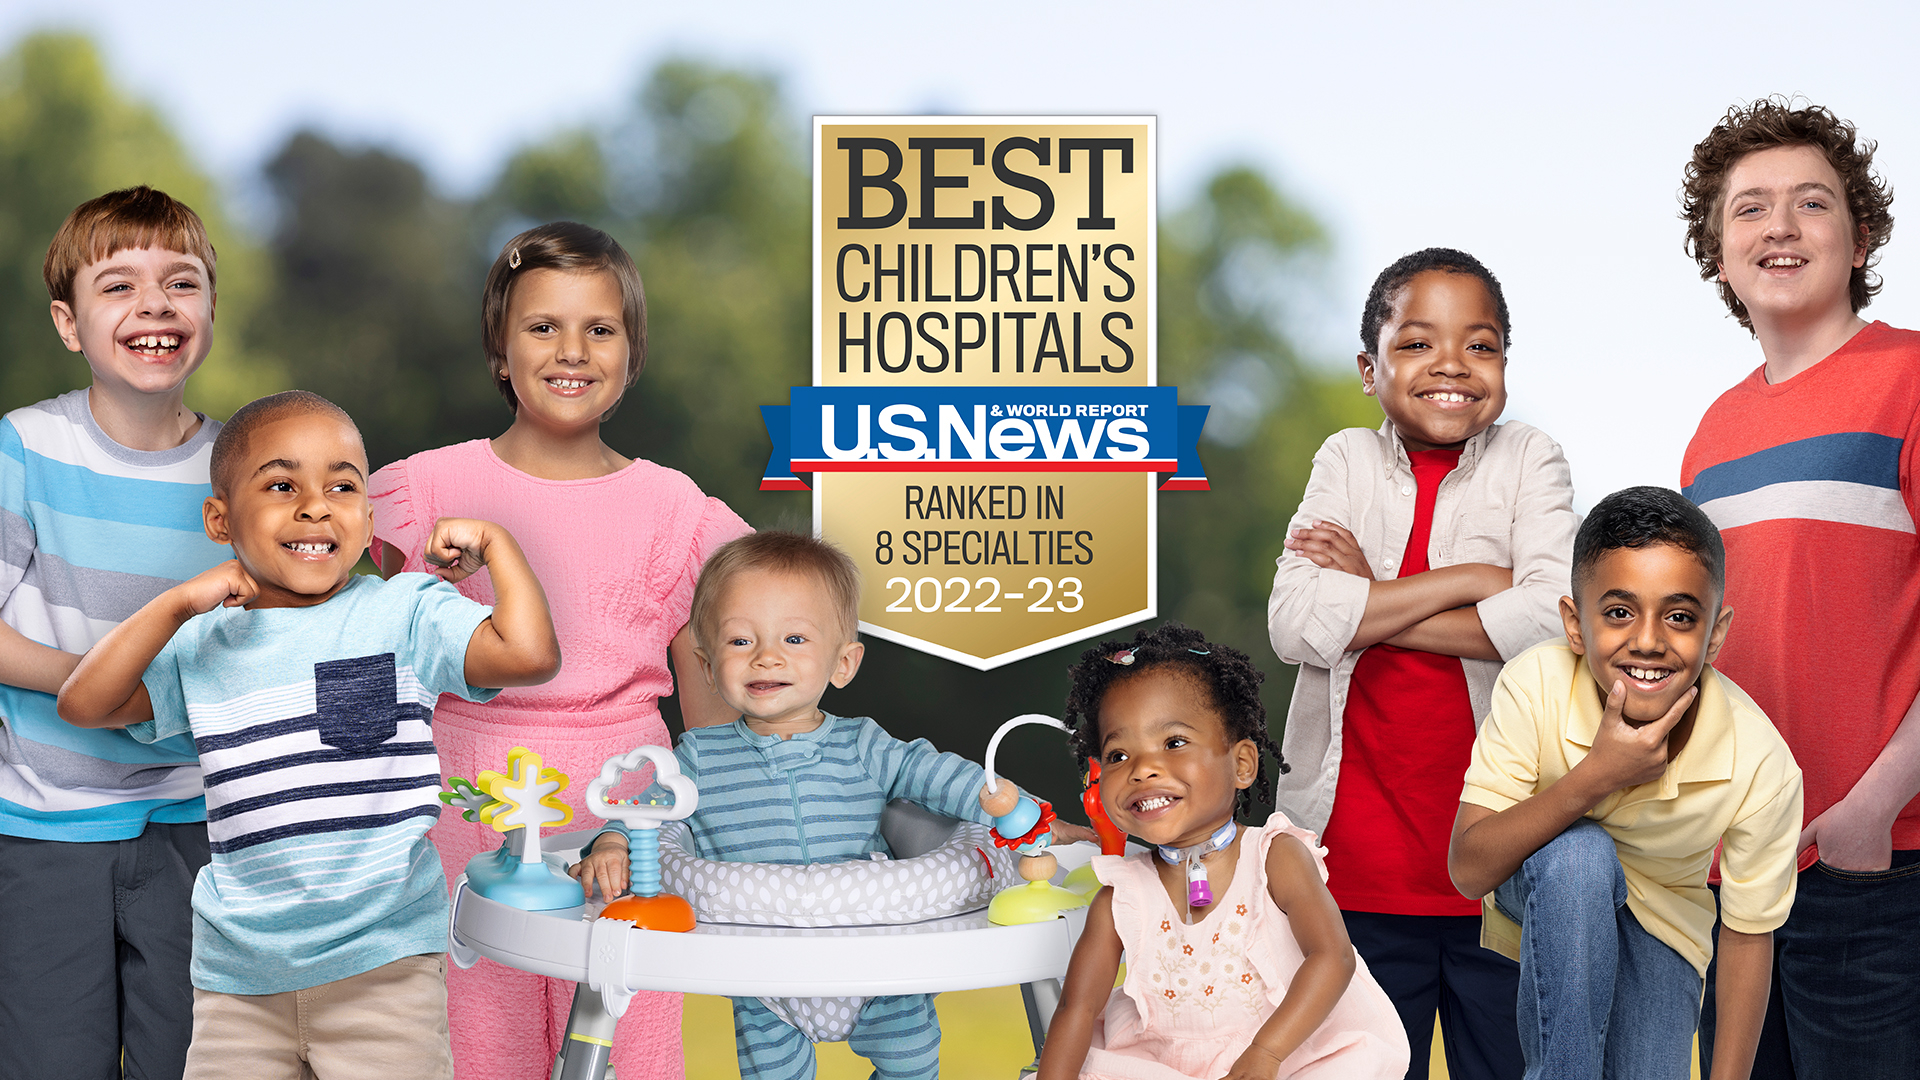 For the 15th consecutive year, Atrium Health’s Levine Children’s Hospital has been recognized as one of U.S. News & World Report’s "Best Children’s Hospitals.”